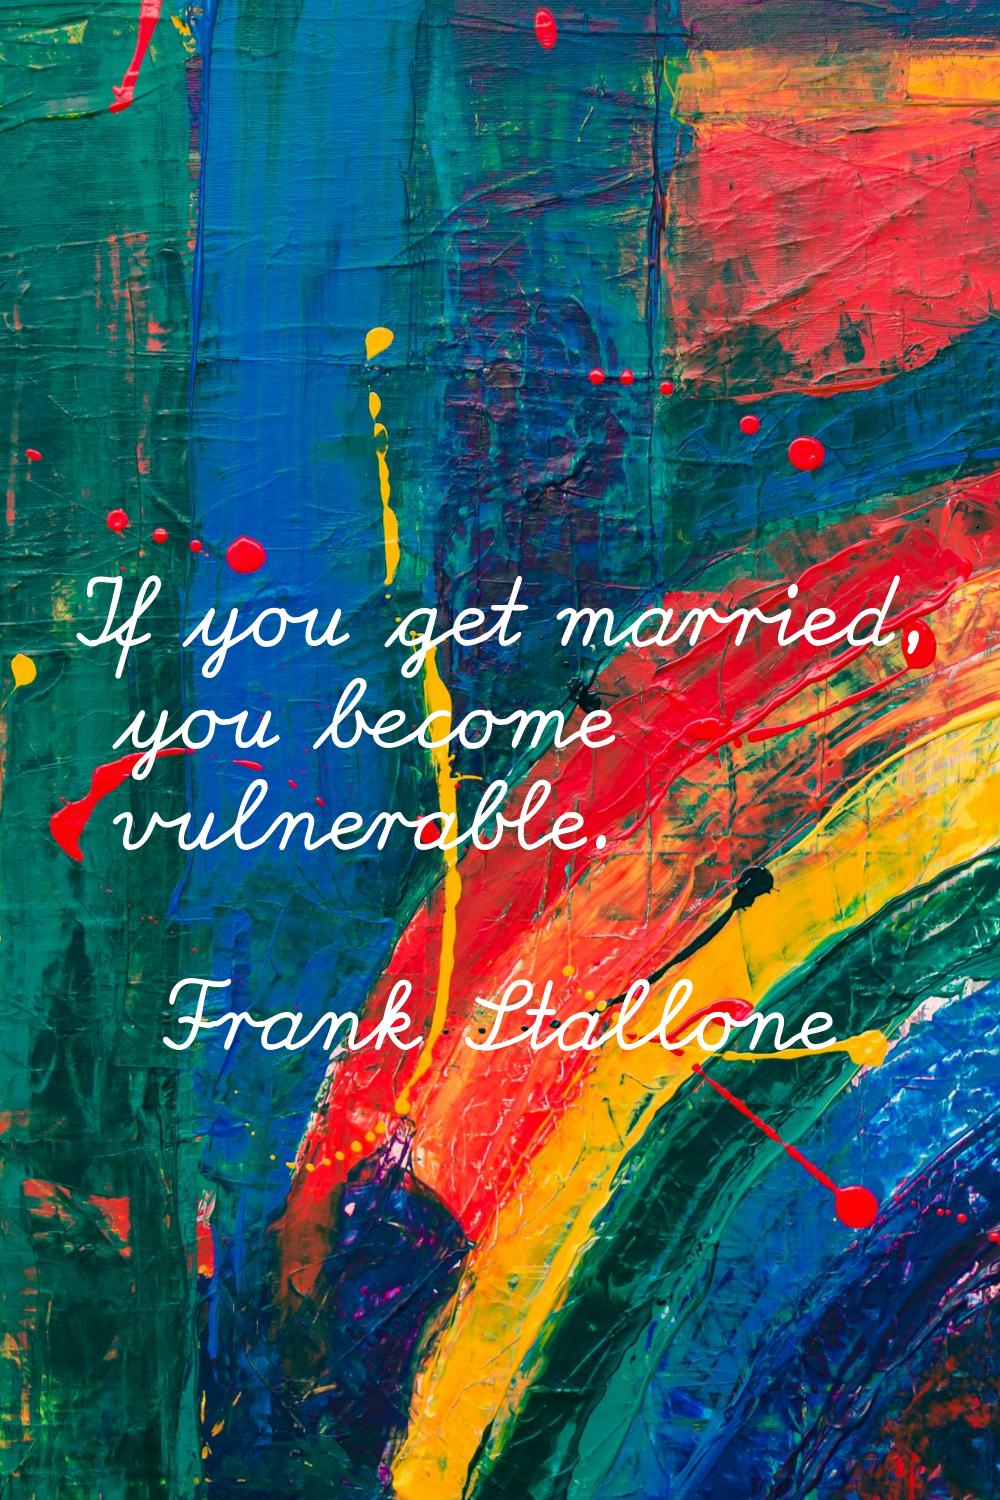 If you get married, you become vulnerable.